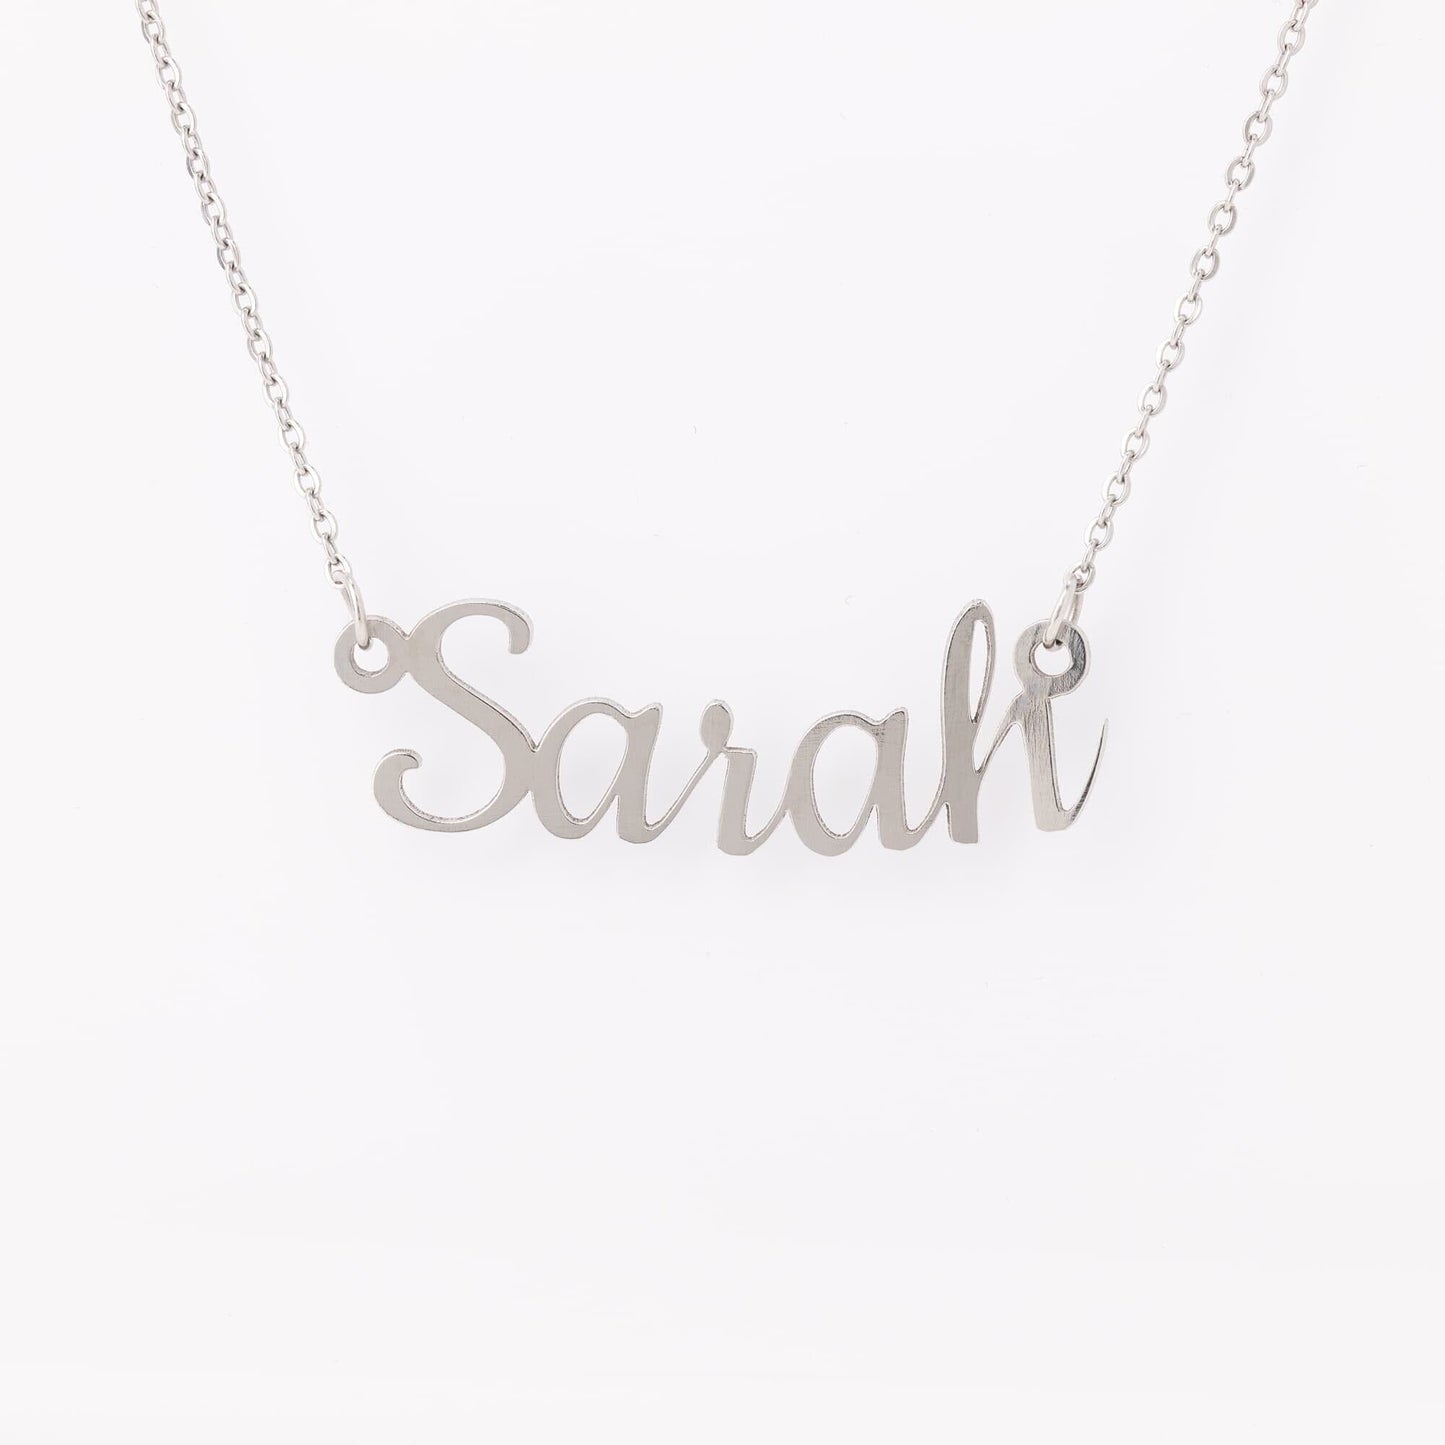 Beautiful Custom Name Necklace - Silver, Rose Gold, or Gold Jewelry 